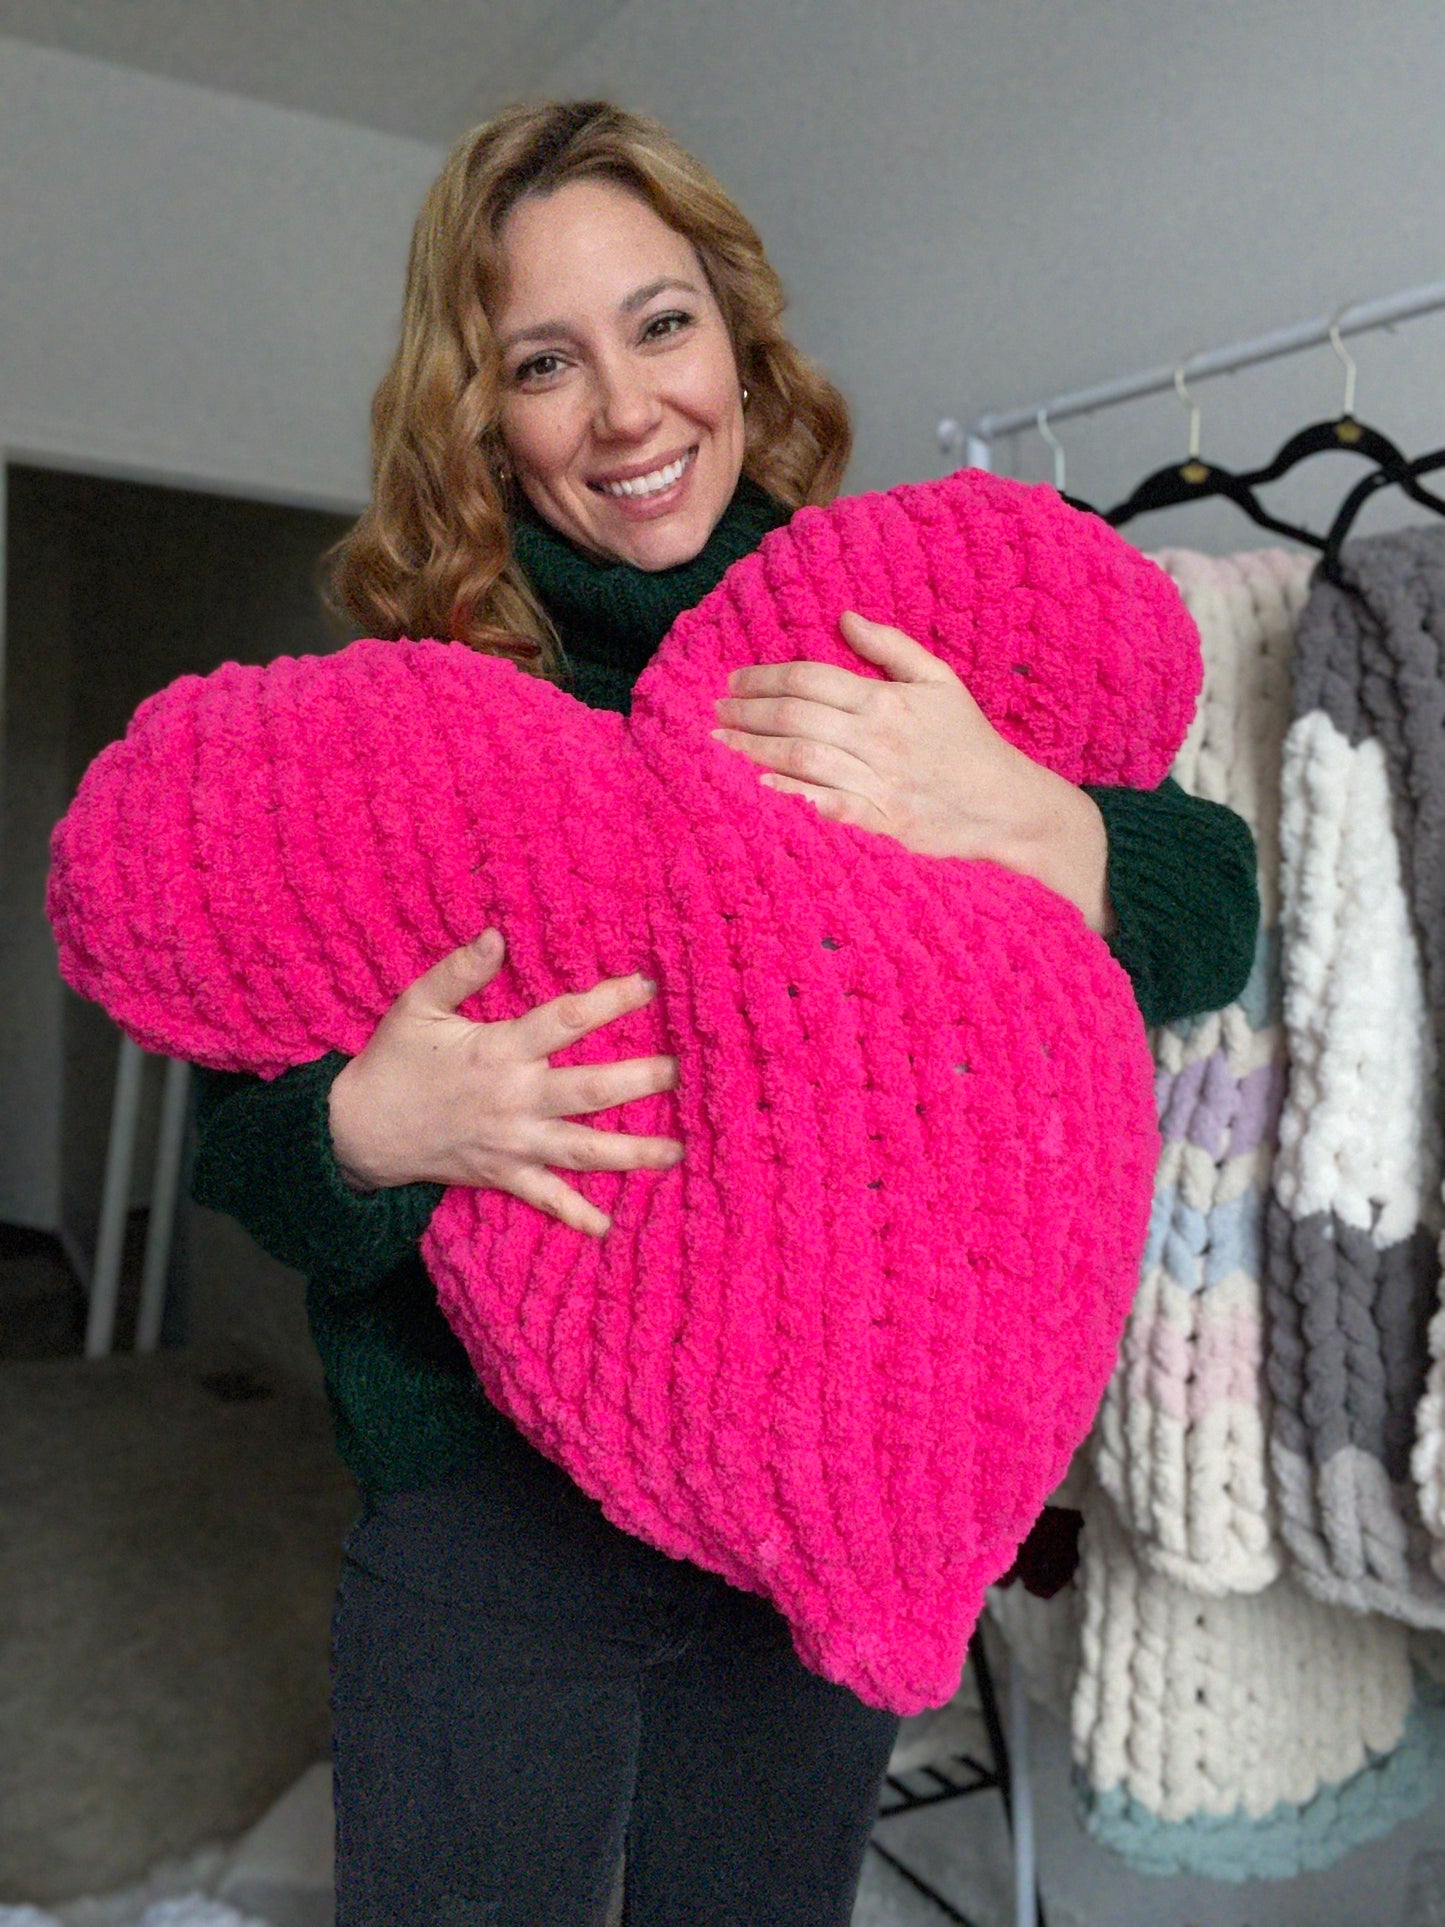 23” Valentine’s Day Heart Pillow in Hot Pink